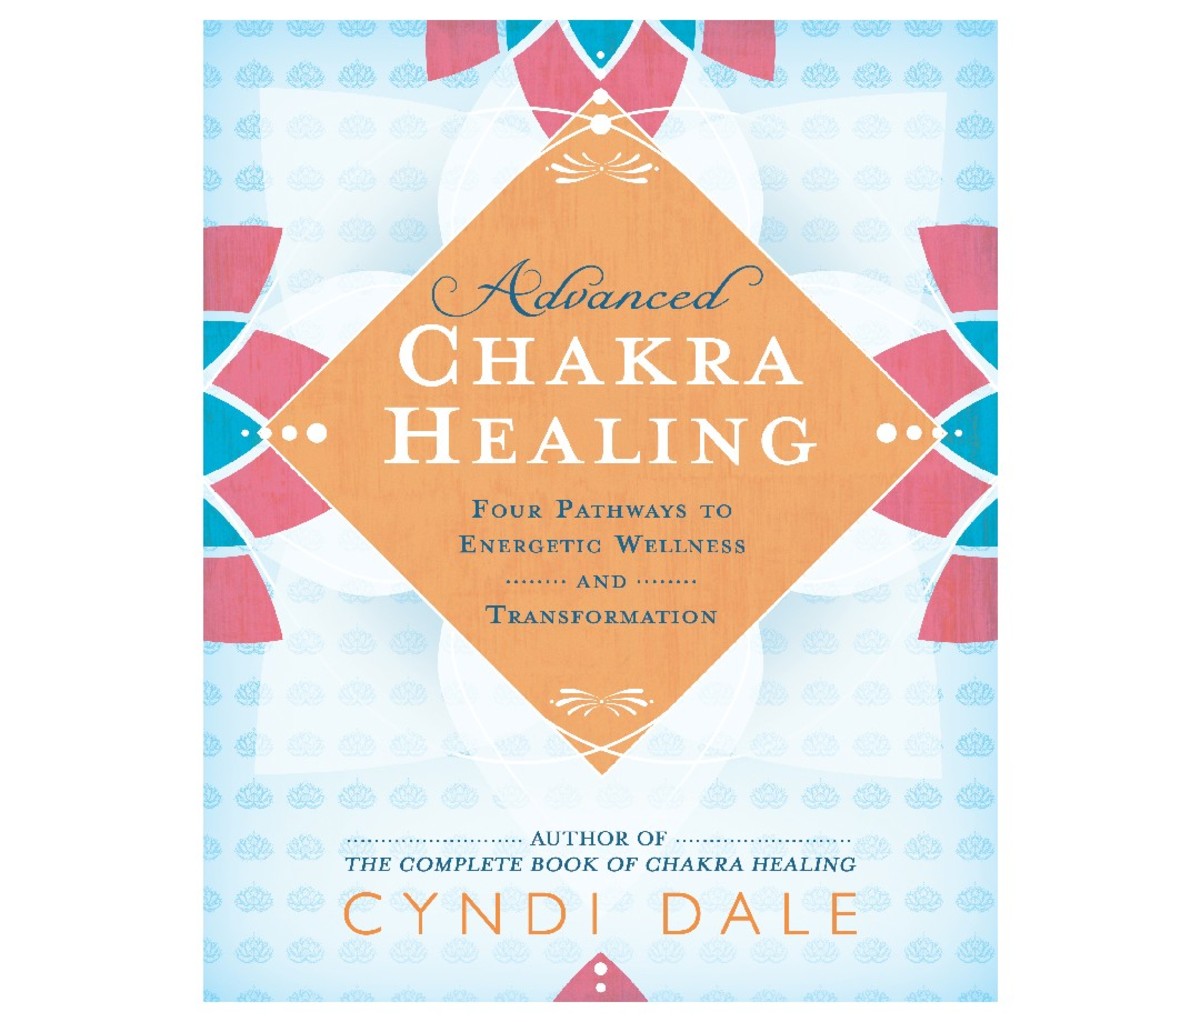 Advanced Chakra Healing: Four Pathways to Energetic Wellness and Transformation by Cyndi Dale